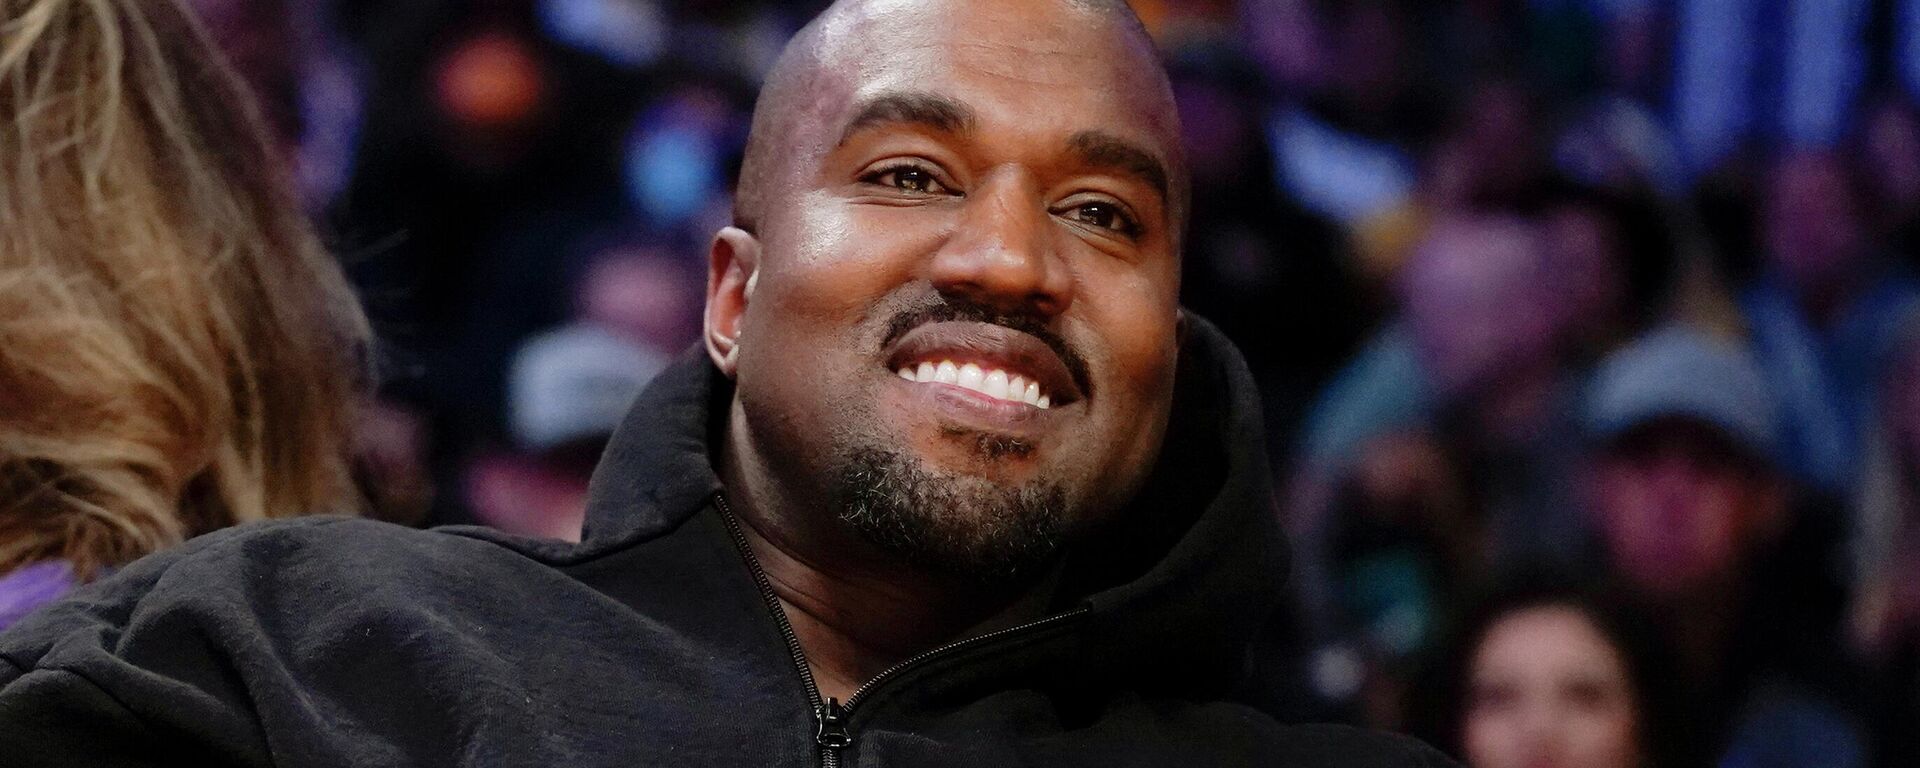 FILE - Kanye West watches the first half of an NBA basketball game between the Washington Wizards and the Los Angeles Lakers in Los Angeles, on March 11, 2022 A completed documentary about the rapper formerly known as Kanye West has been shelved amid his recent slew of antisemitic remark - Sputnik International, 1920, 27.10.2022